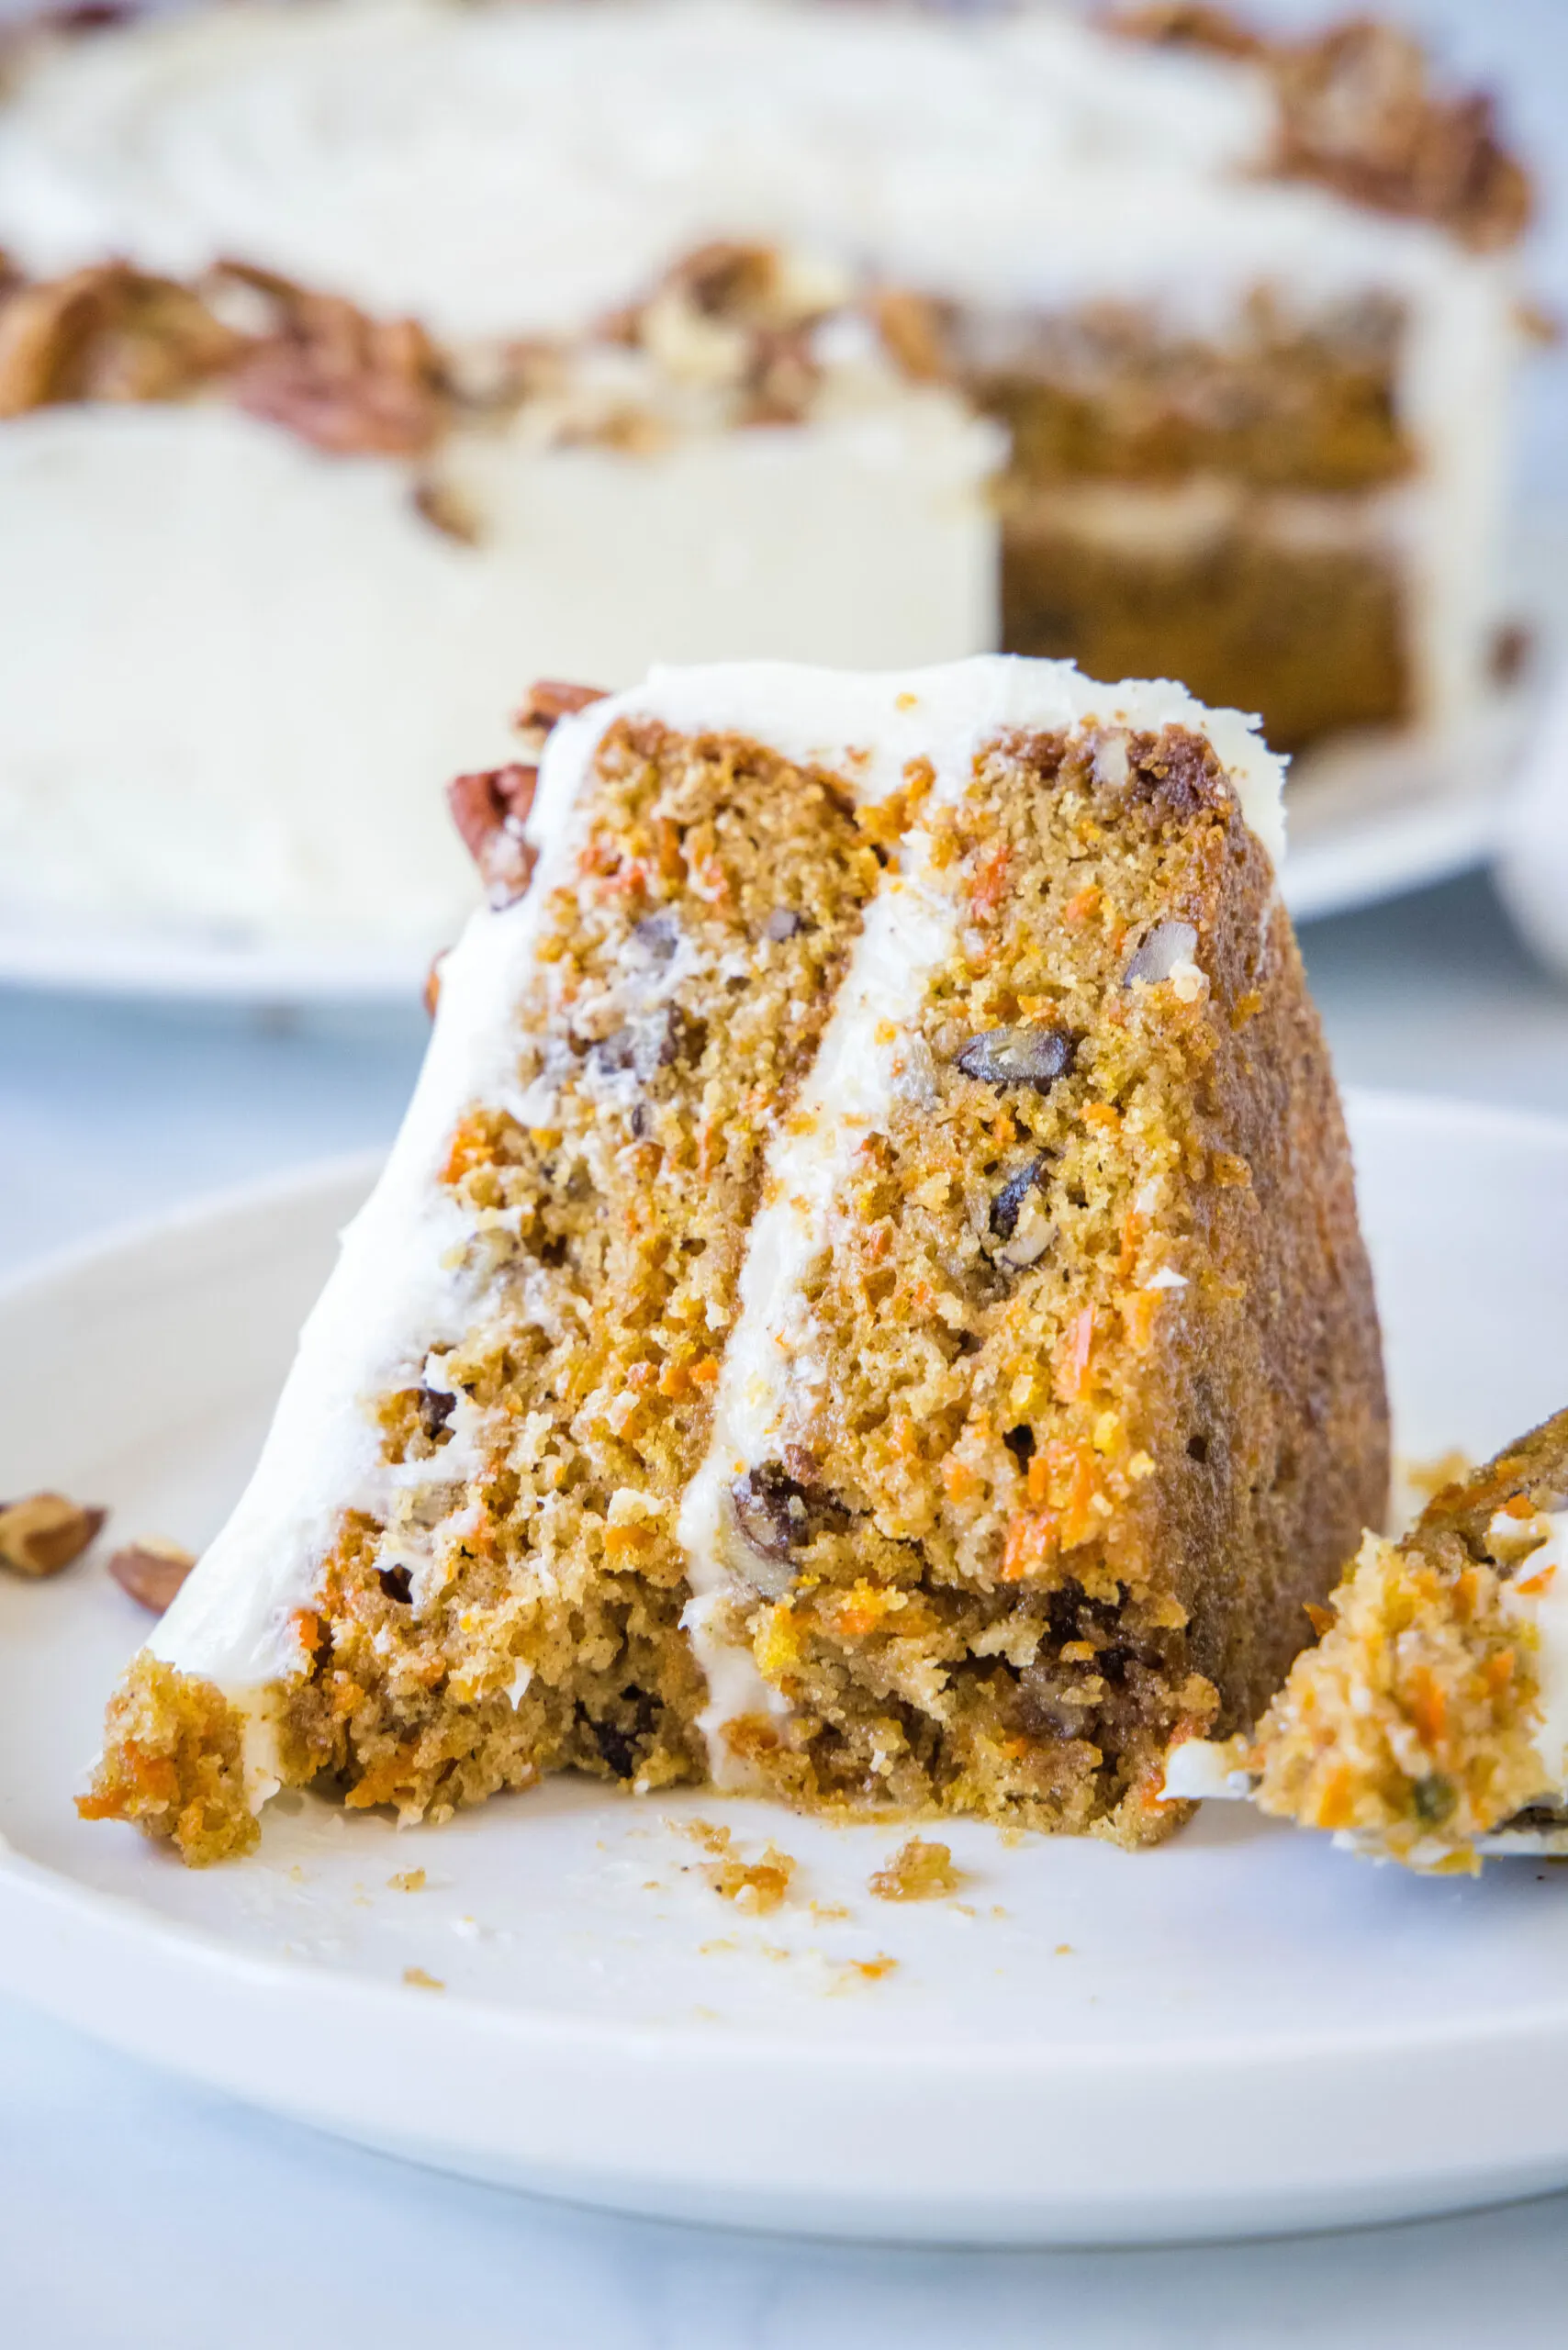 A slice of frosted carrot cake on a white plate with forkfuls missing.